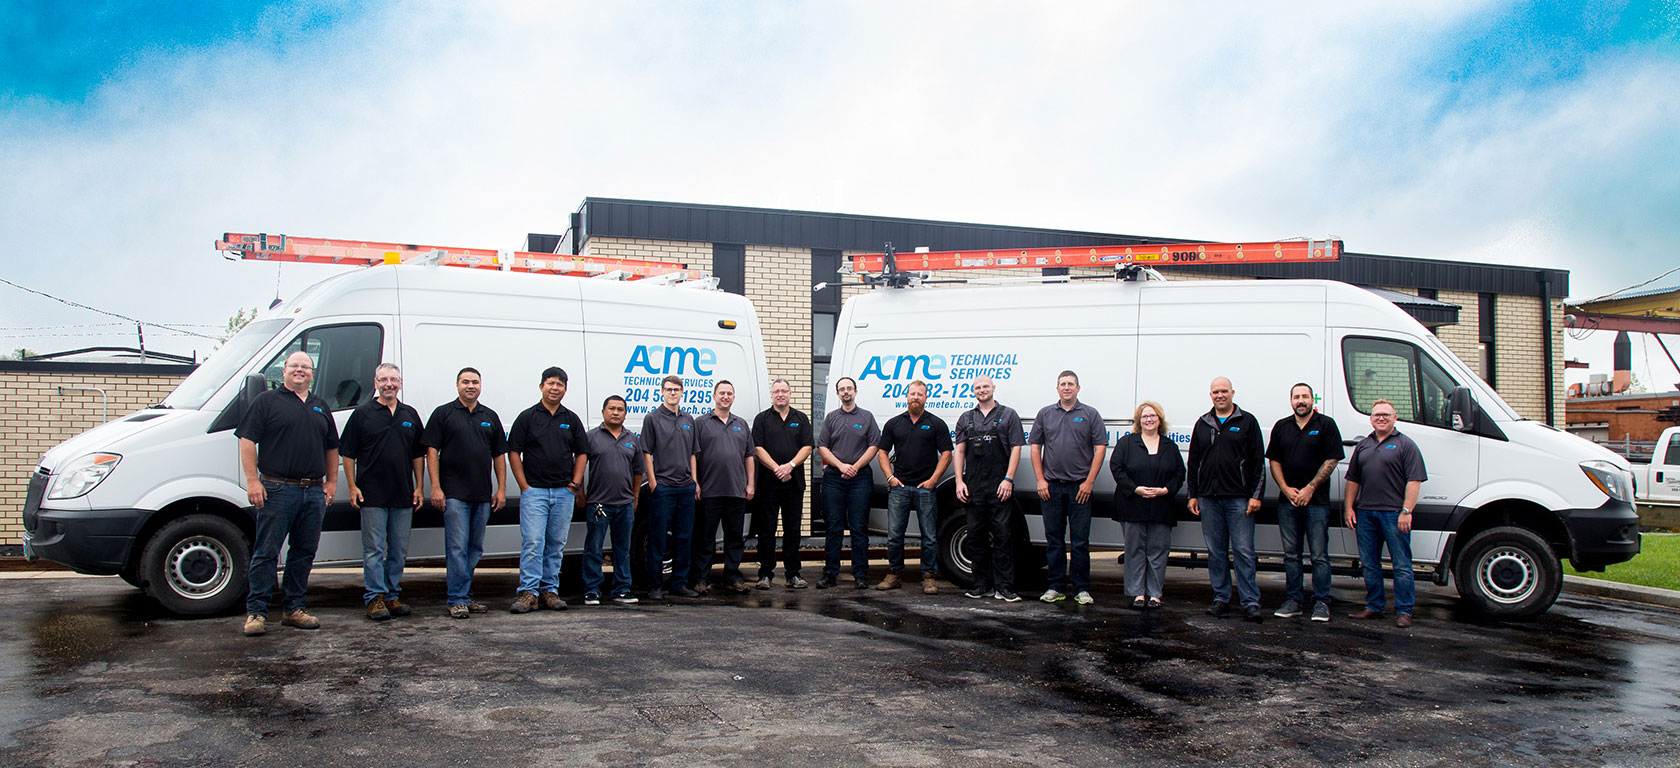 ACME Technical Services team photo in front of our vehicles and building.